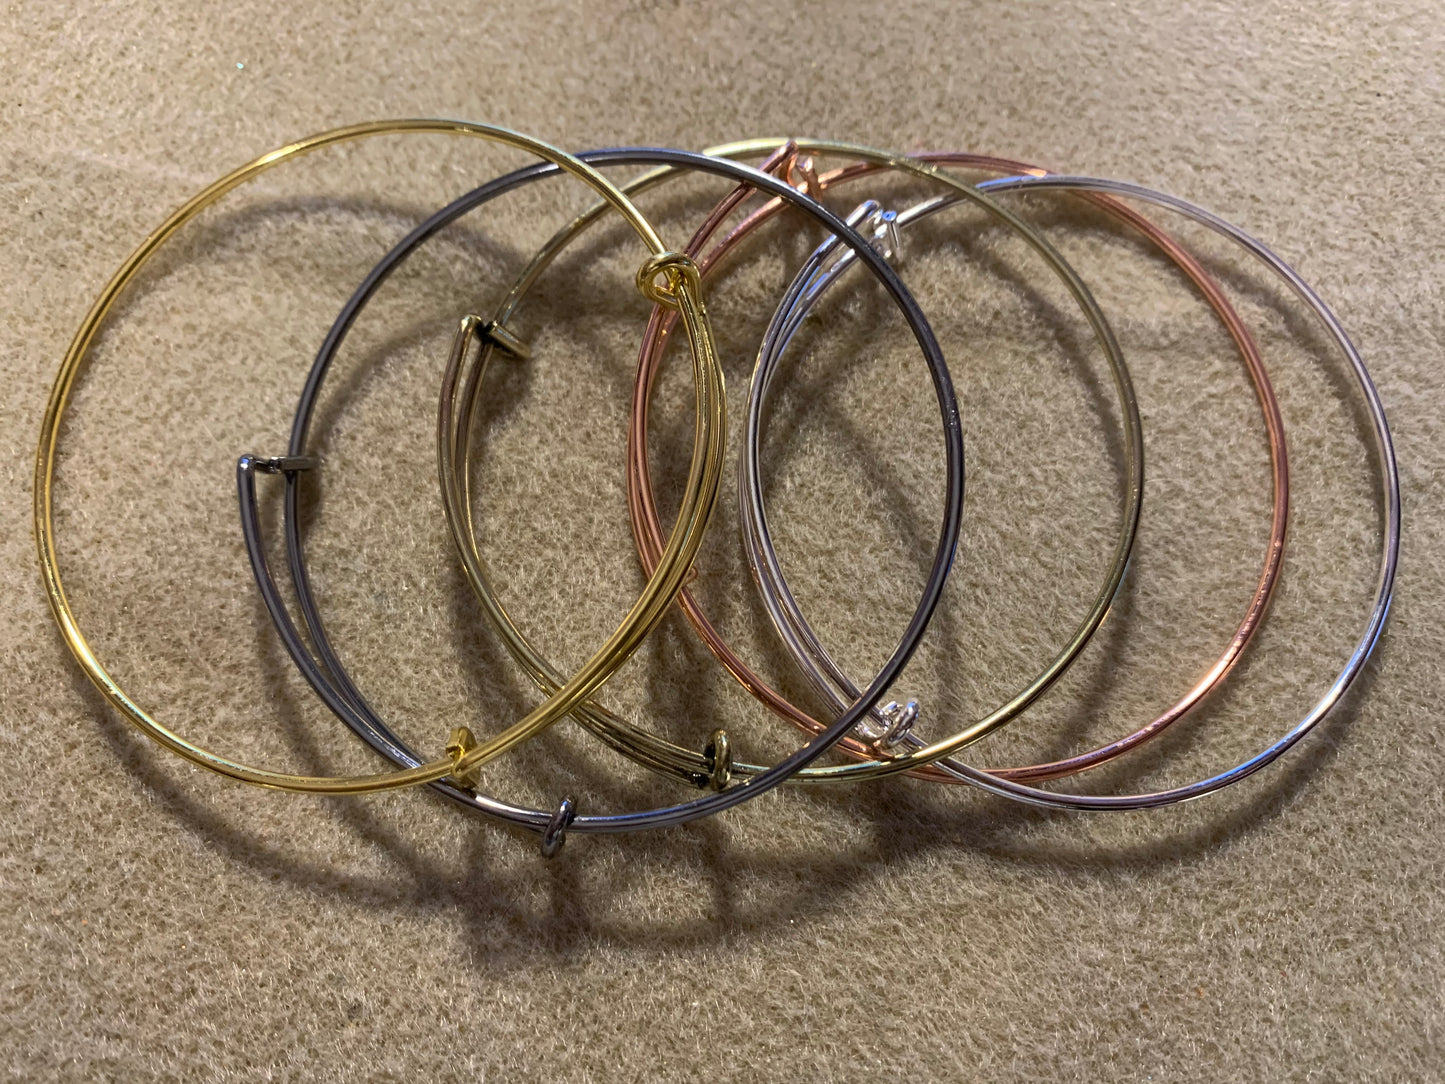 Adjustable Stainless Steel Bangles (5 different colors)